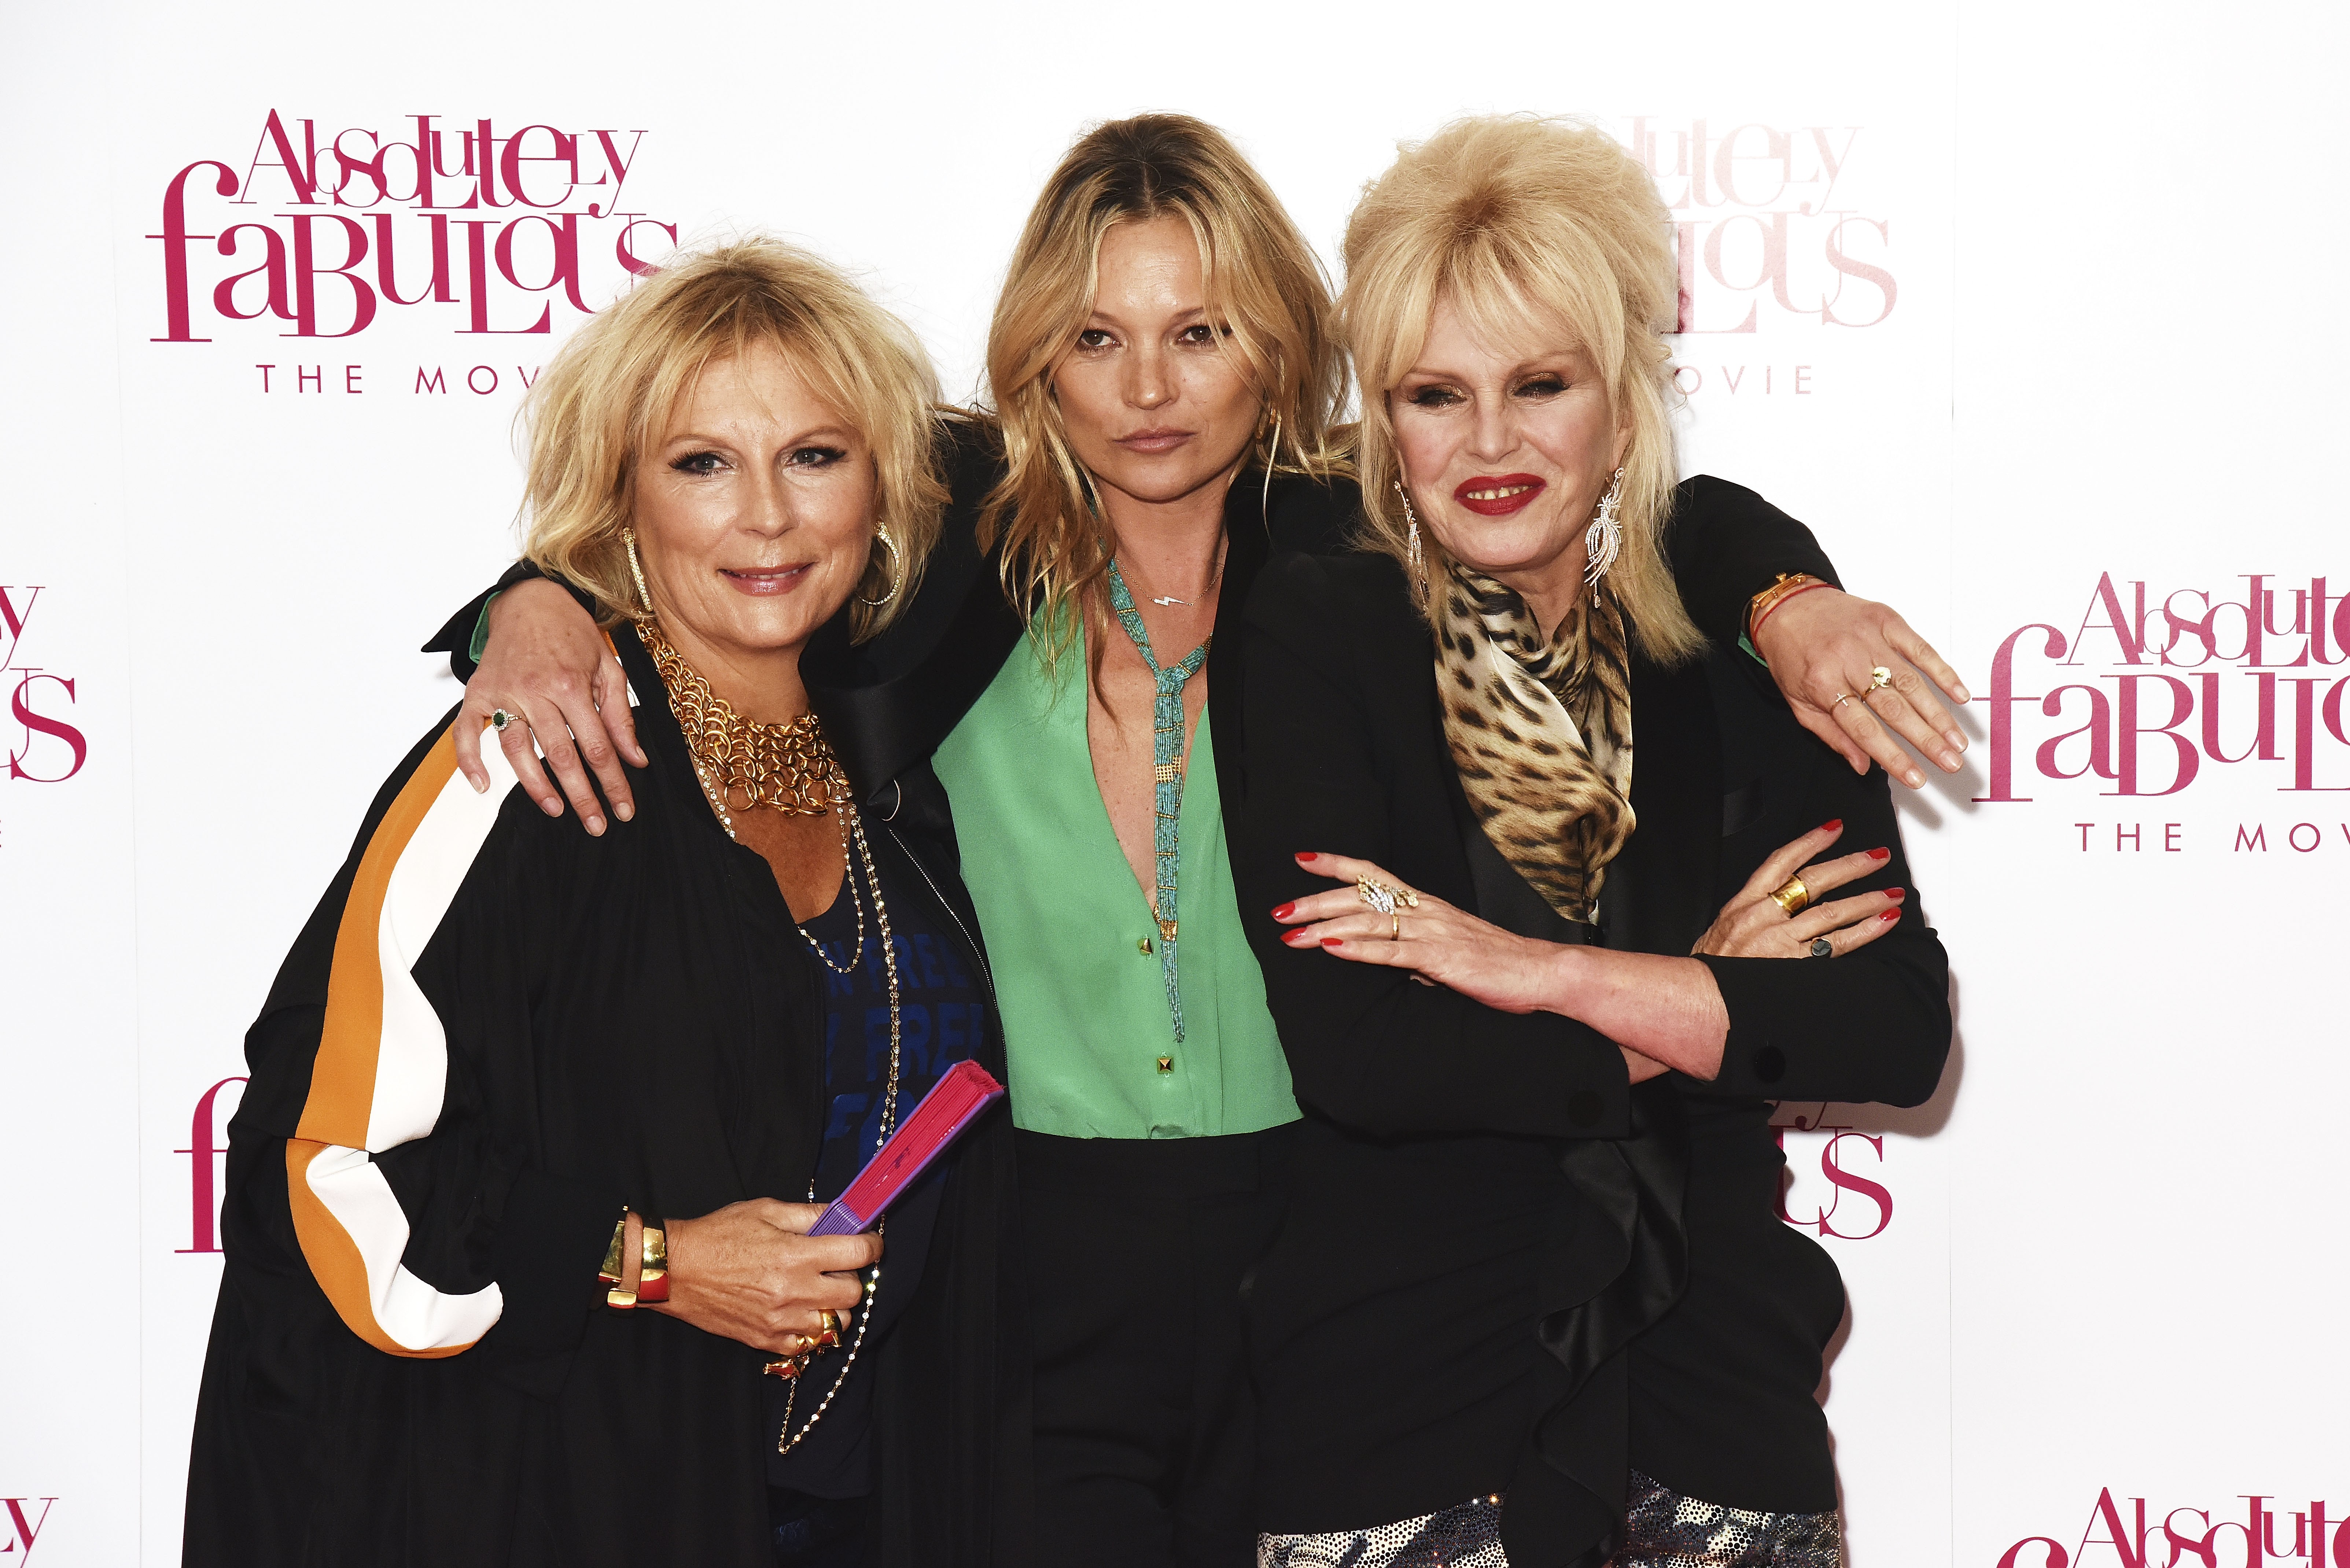 High Resolution Wallpaper | Absolutely Fabulous 6412x4279 px